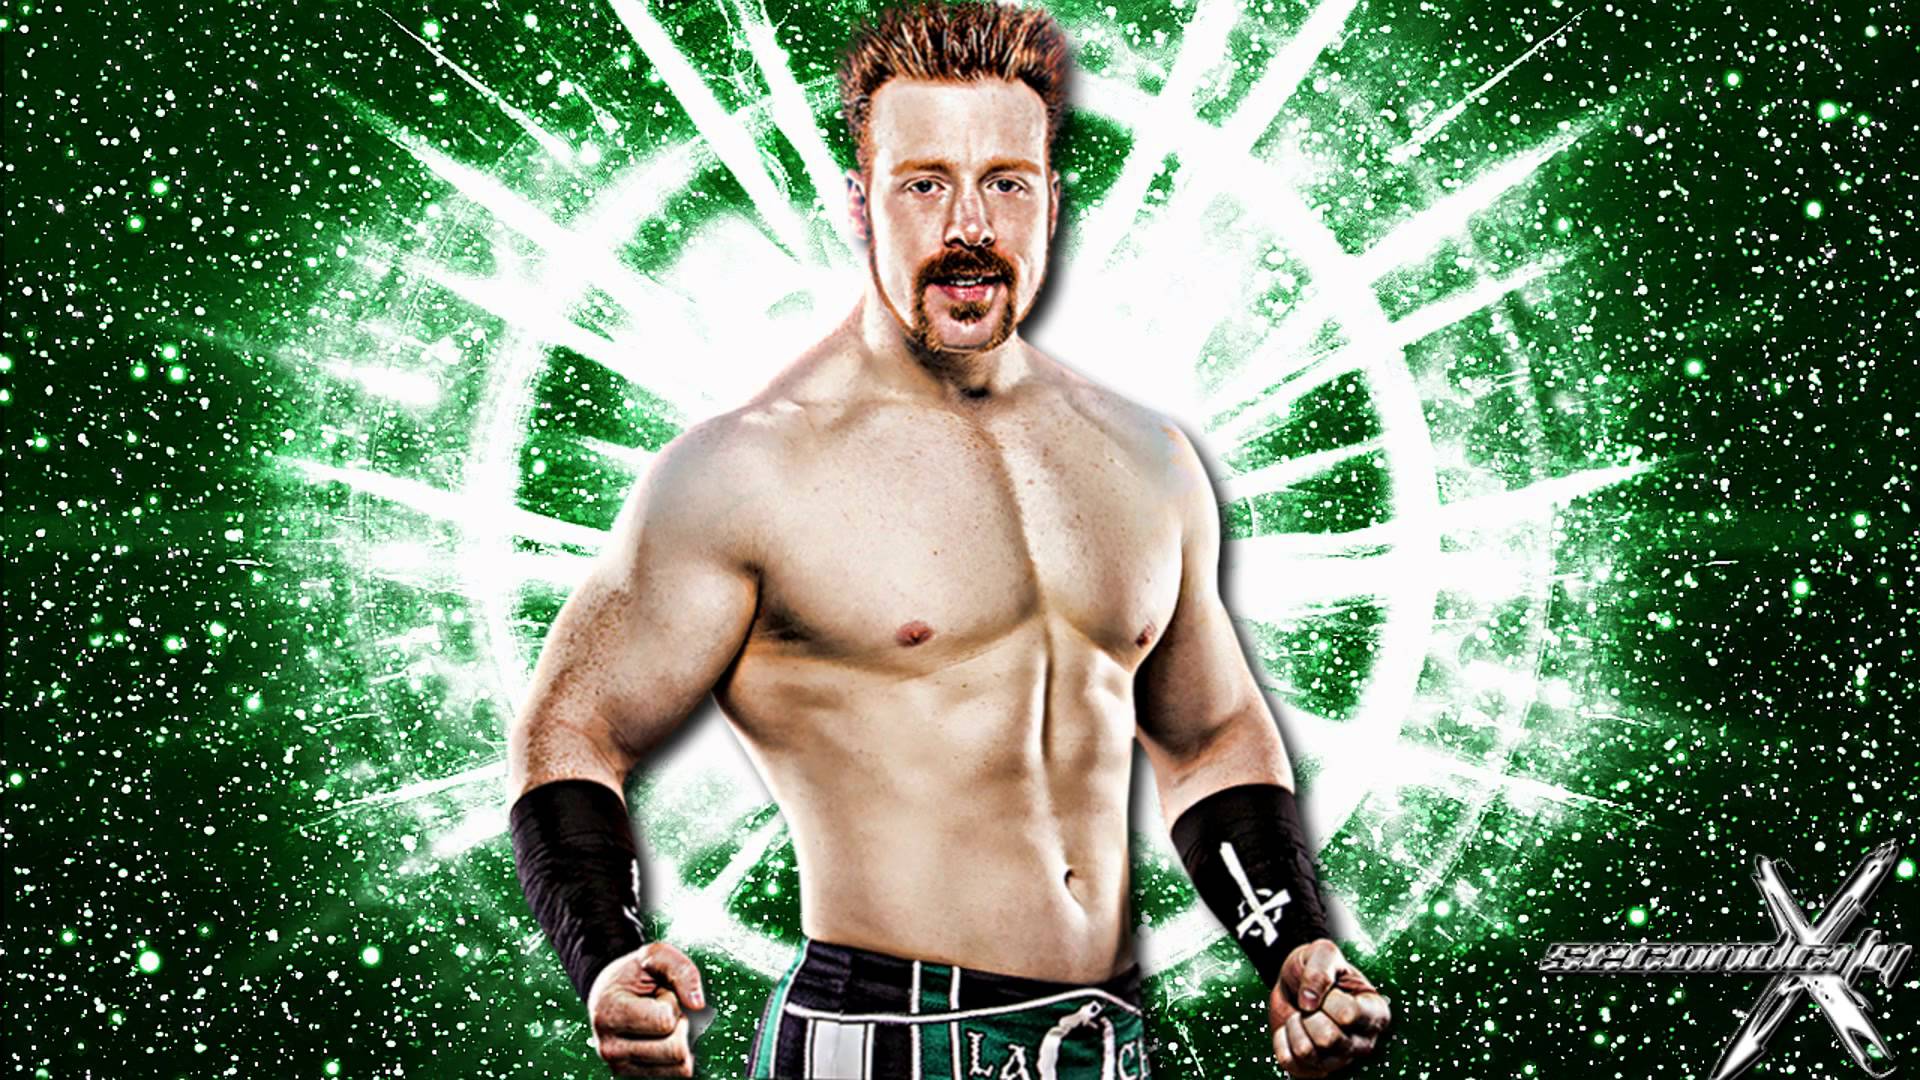 sheamus wallpaper,wrestler,professional wrestling,barechested,muscle,contact sport